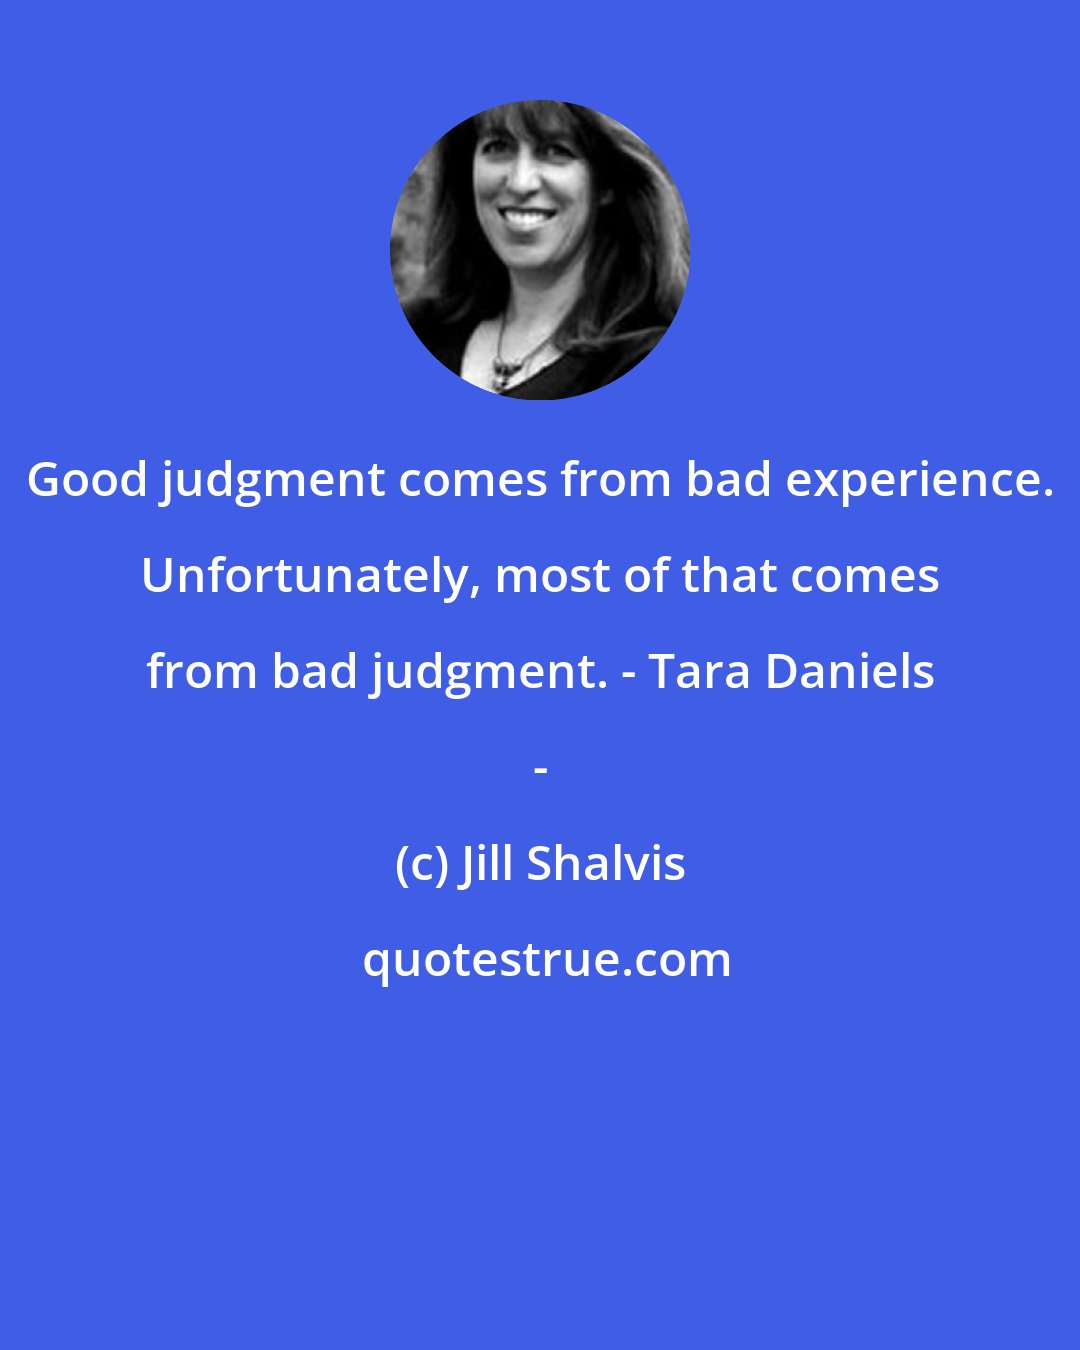 Jill Shalvis: Good judgment comes from bad experience. Unfortunately, most of that comes from bad judgment. - Tara Daniels -